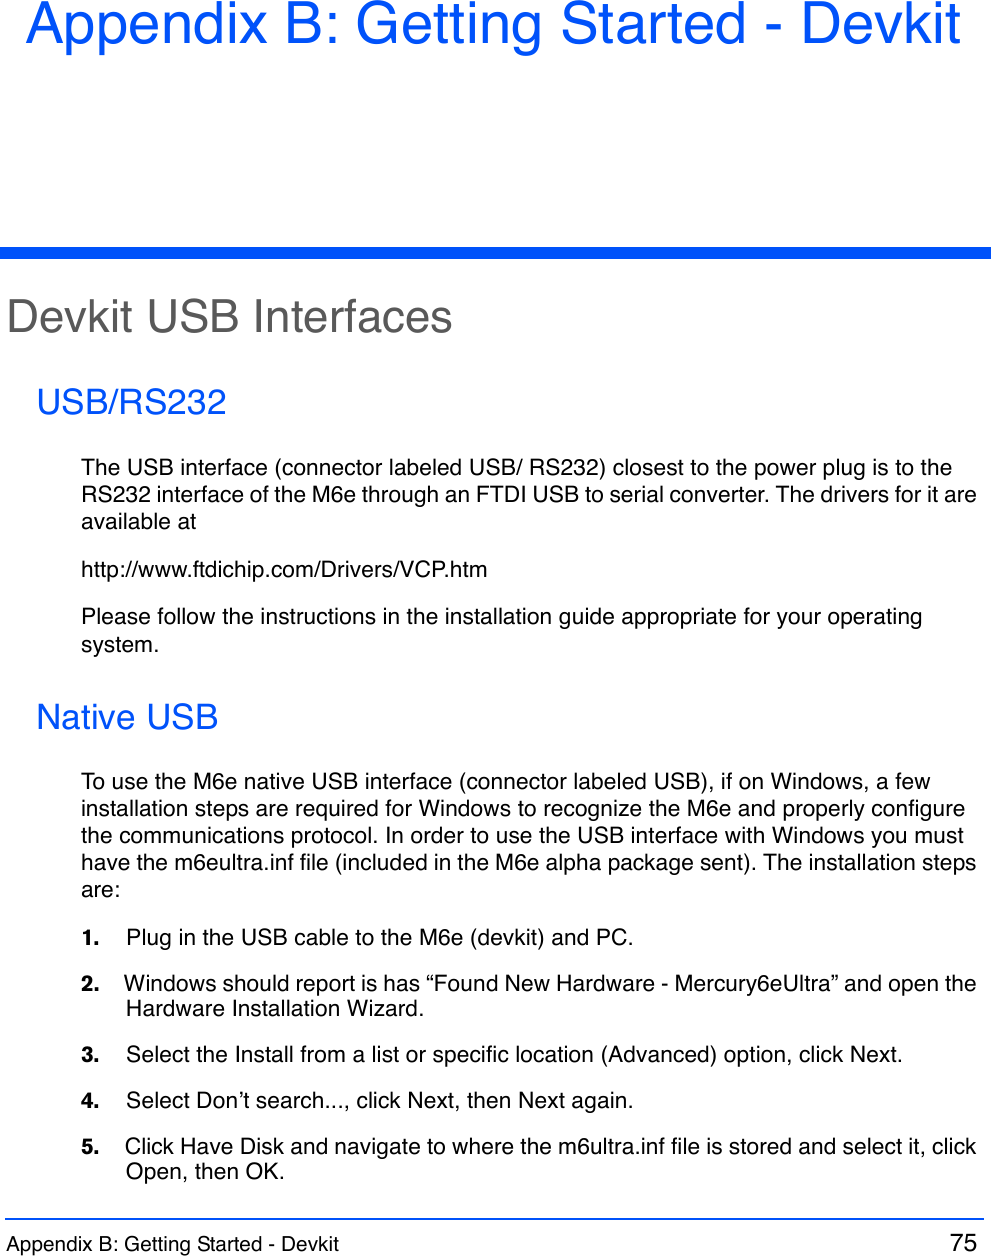 Appendix B: Getting Started - Devkit  75 Appendix B: Getting Started - DevkitDevkit USB InterfacesUSB/RS232The USB interface (connector labeled USB/ RS232) closest to the power plug is to the RS232 interface of the M6e through an FTDI USB to serial converter. The drivers for it are available athttp://www.ftdichip.com/Drivers/VCP.htmPlease follow the instructions in the installation guide appropriate for your operating system.Native USBTo use the M6e native USB interface (connector labeled USB), if on Windows, a few installation steps are required for Windows to recognize the M6e and properly configure the communications protocol. In order to use the USB interface with Windows you must have the m6eultra.inf file (included in the M6e alpha package sent). The installation steps are:1.    Plug in the USB cable to the M6e (devkit) and PC.2.    Windows should report is has “Found New Hardware - Mercury6eUltra” and open the Hardware Installation Wizard.3.    Select the Install from a list or specific location (Advanced) option, click Next.4.    Select Don’t search..., click Next, then Next again. 5.    Click Have Disk and navigate to where the m6ultra.inf file is stored and select it, click Open, then OK.